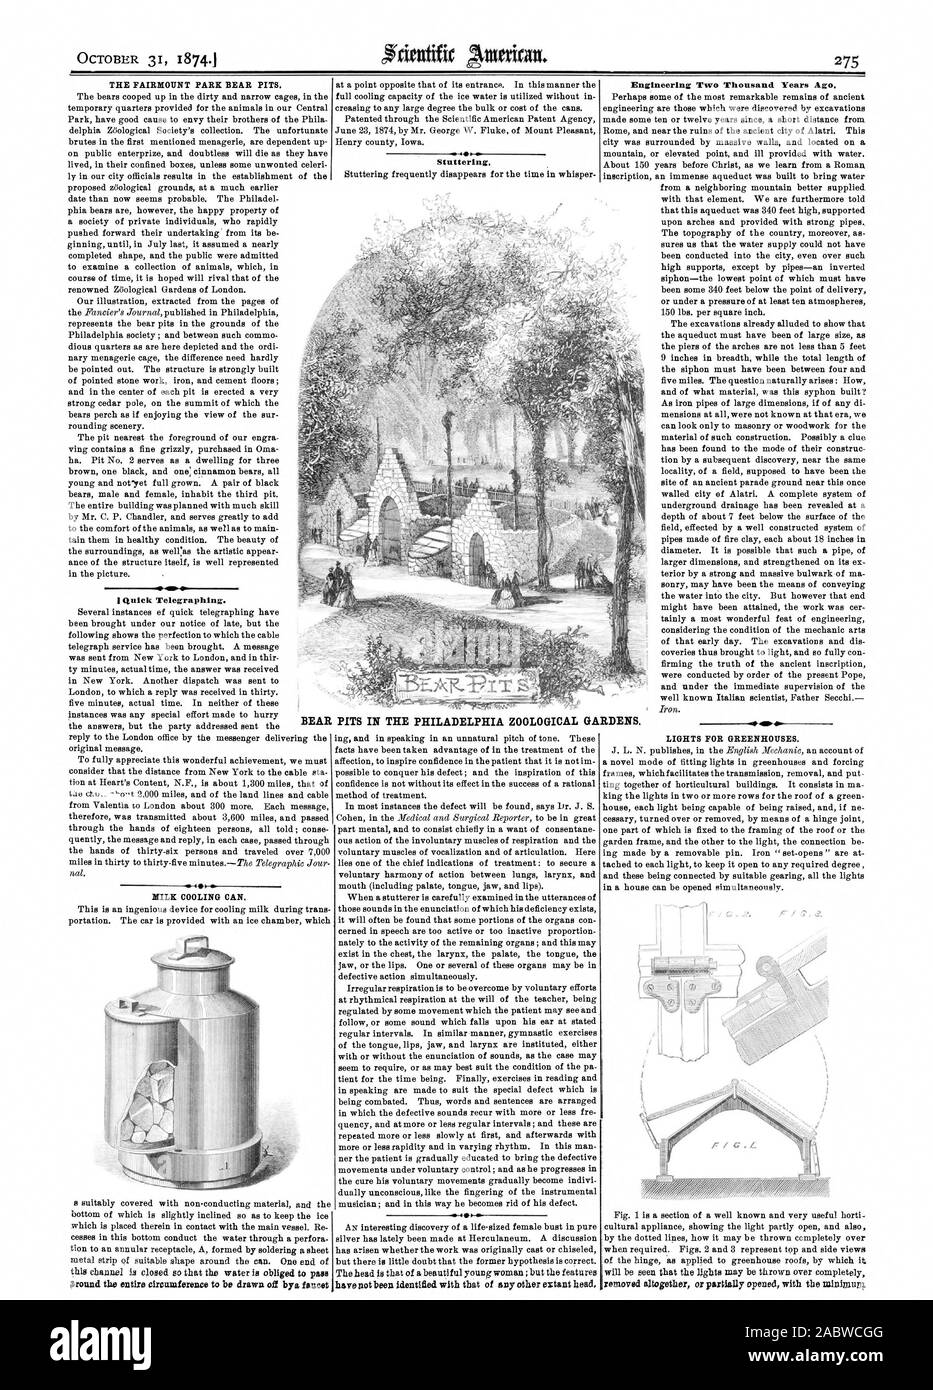 THE FAIRMOUNT PARK BEAR PITS.Quick Telegraphing. 1-0 MILK COOLING CAN. Stuttering Engineering Two Thousand Years Ag LIGHTS FOR GREENHOUSES. BEAR PITS IN THE PHILADELPHIA ZOOLOGICAL GARDENS., scientific american, 1874-10-31 Stock Photo